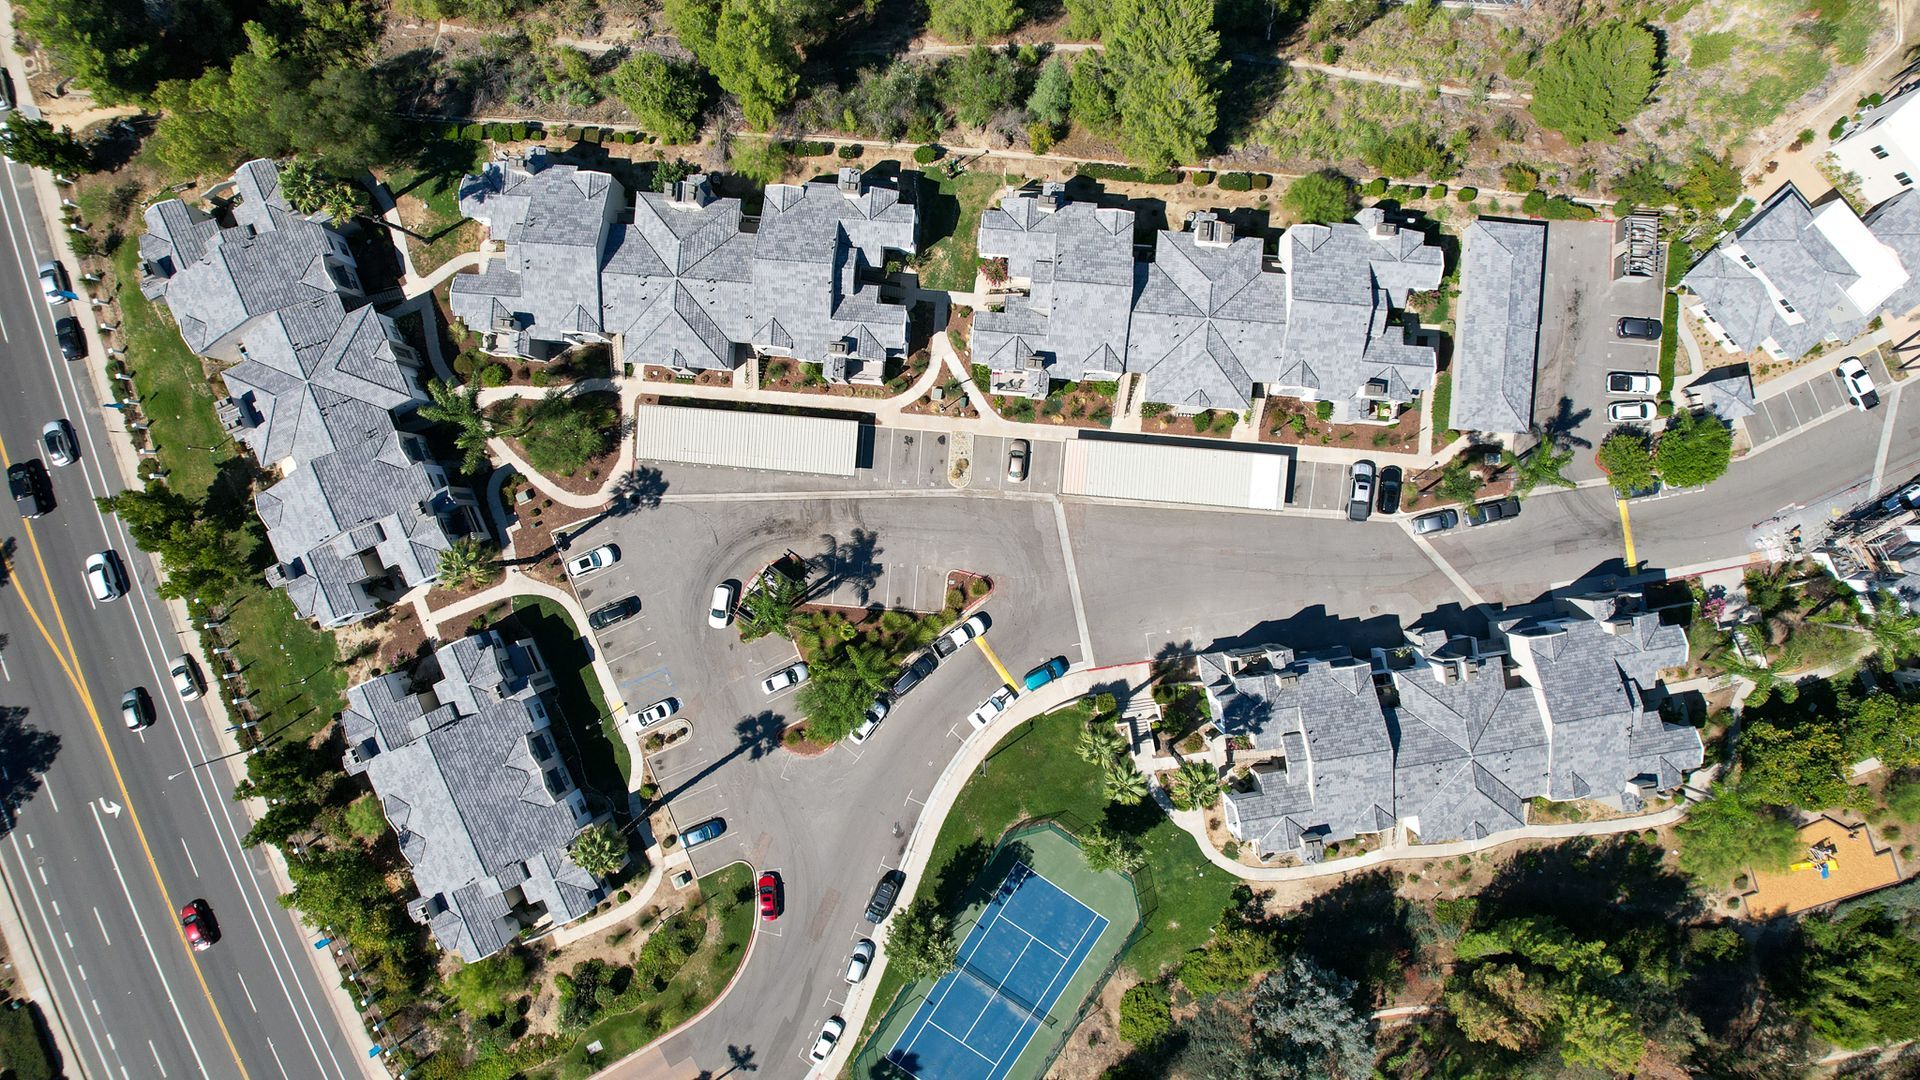 an aerial view of a residential area with a tennis court